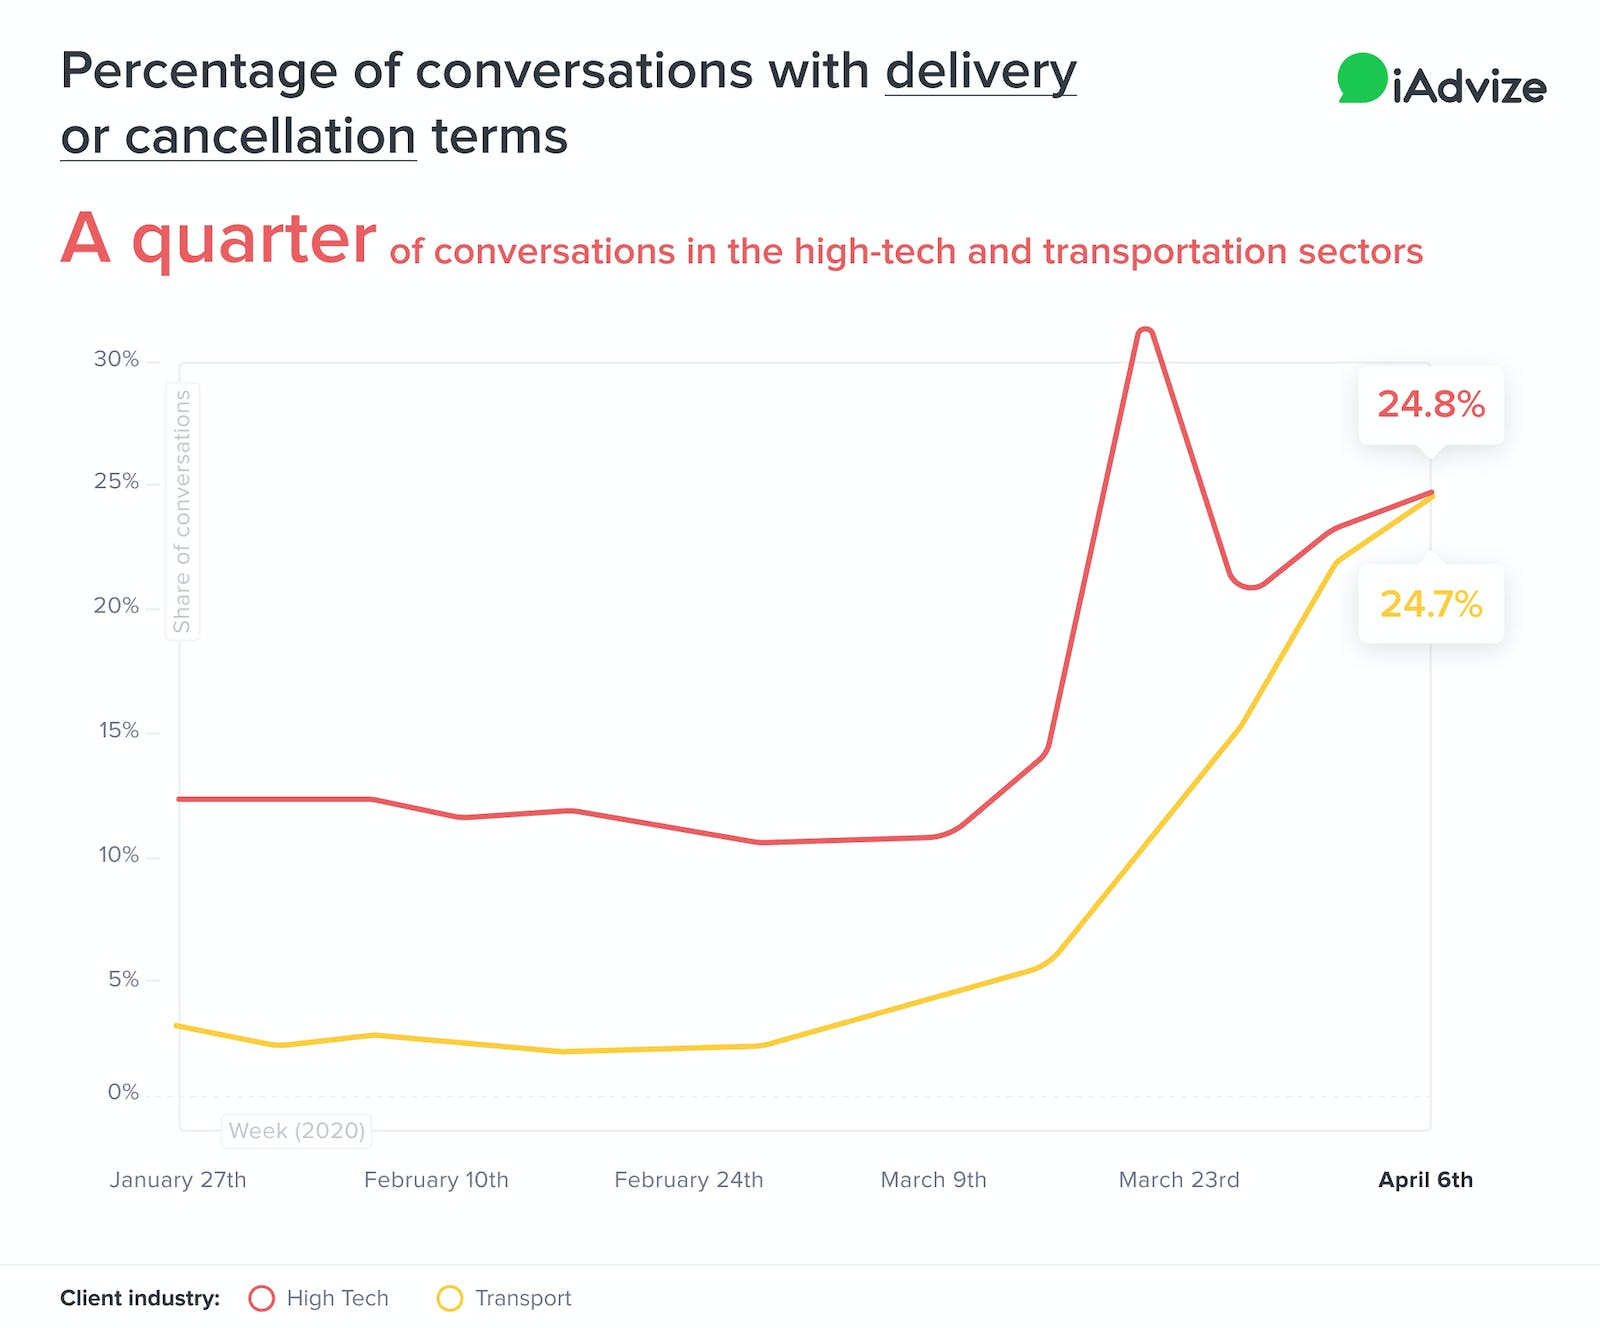 Percentage of conversation with delivery or cancellation terms